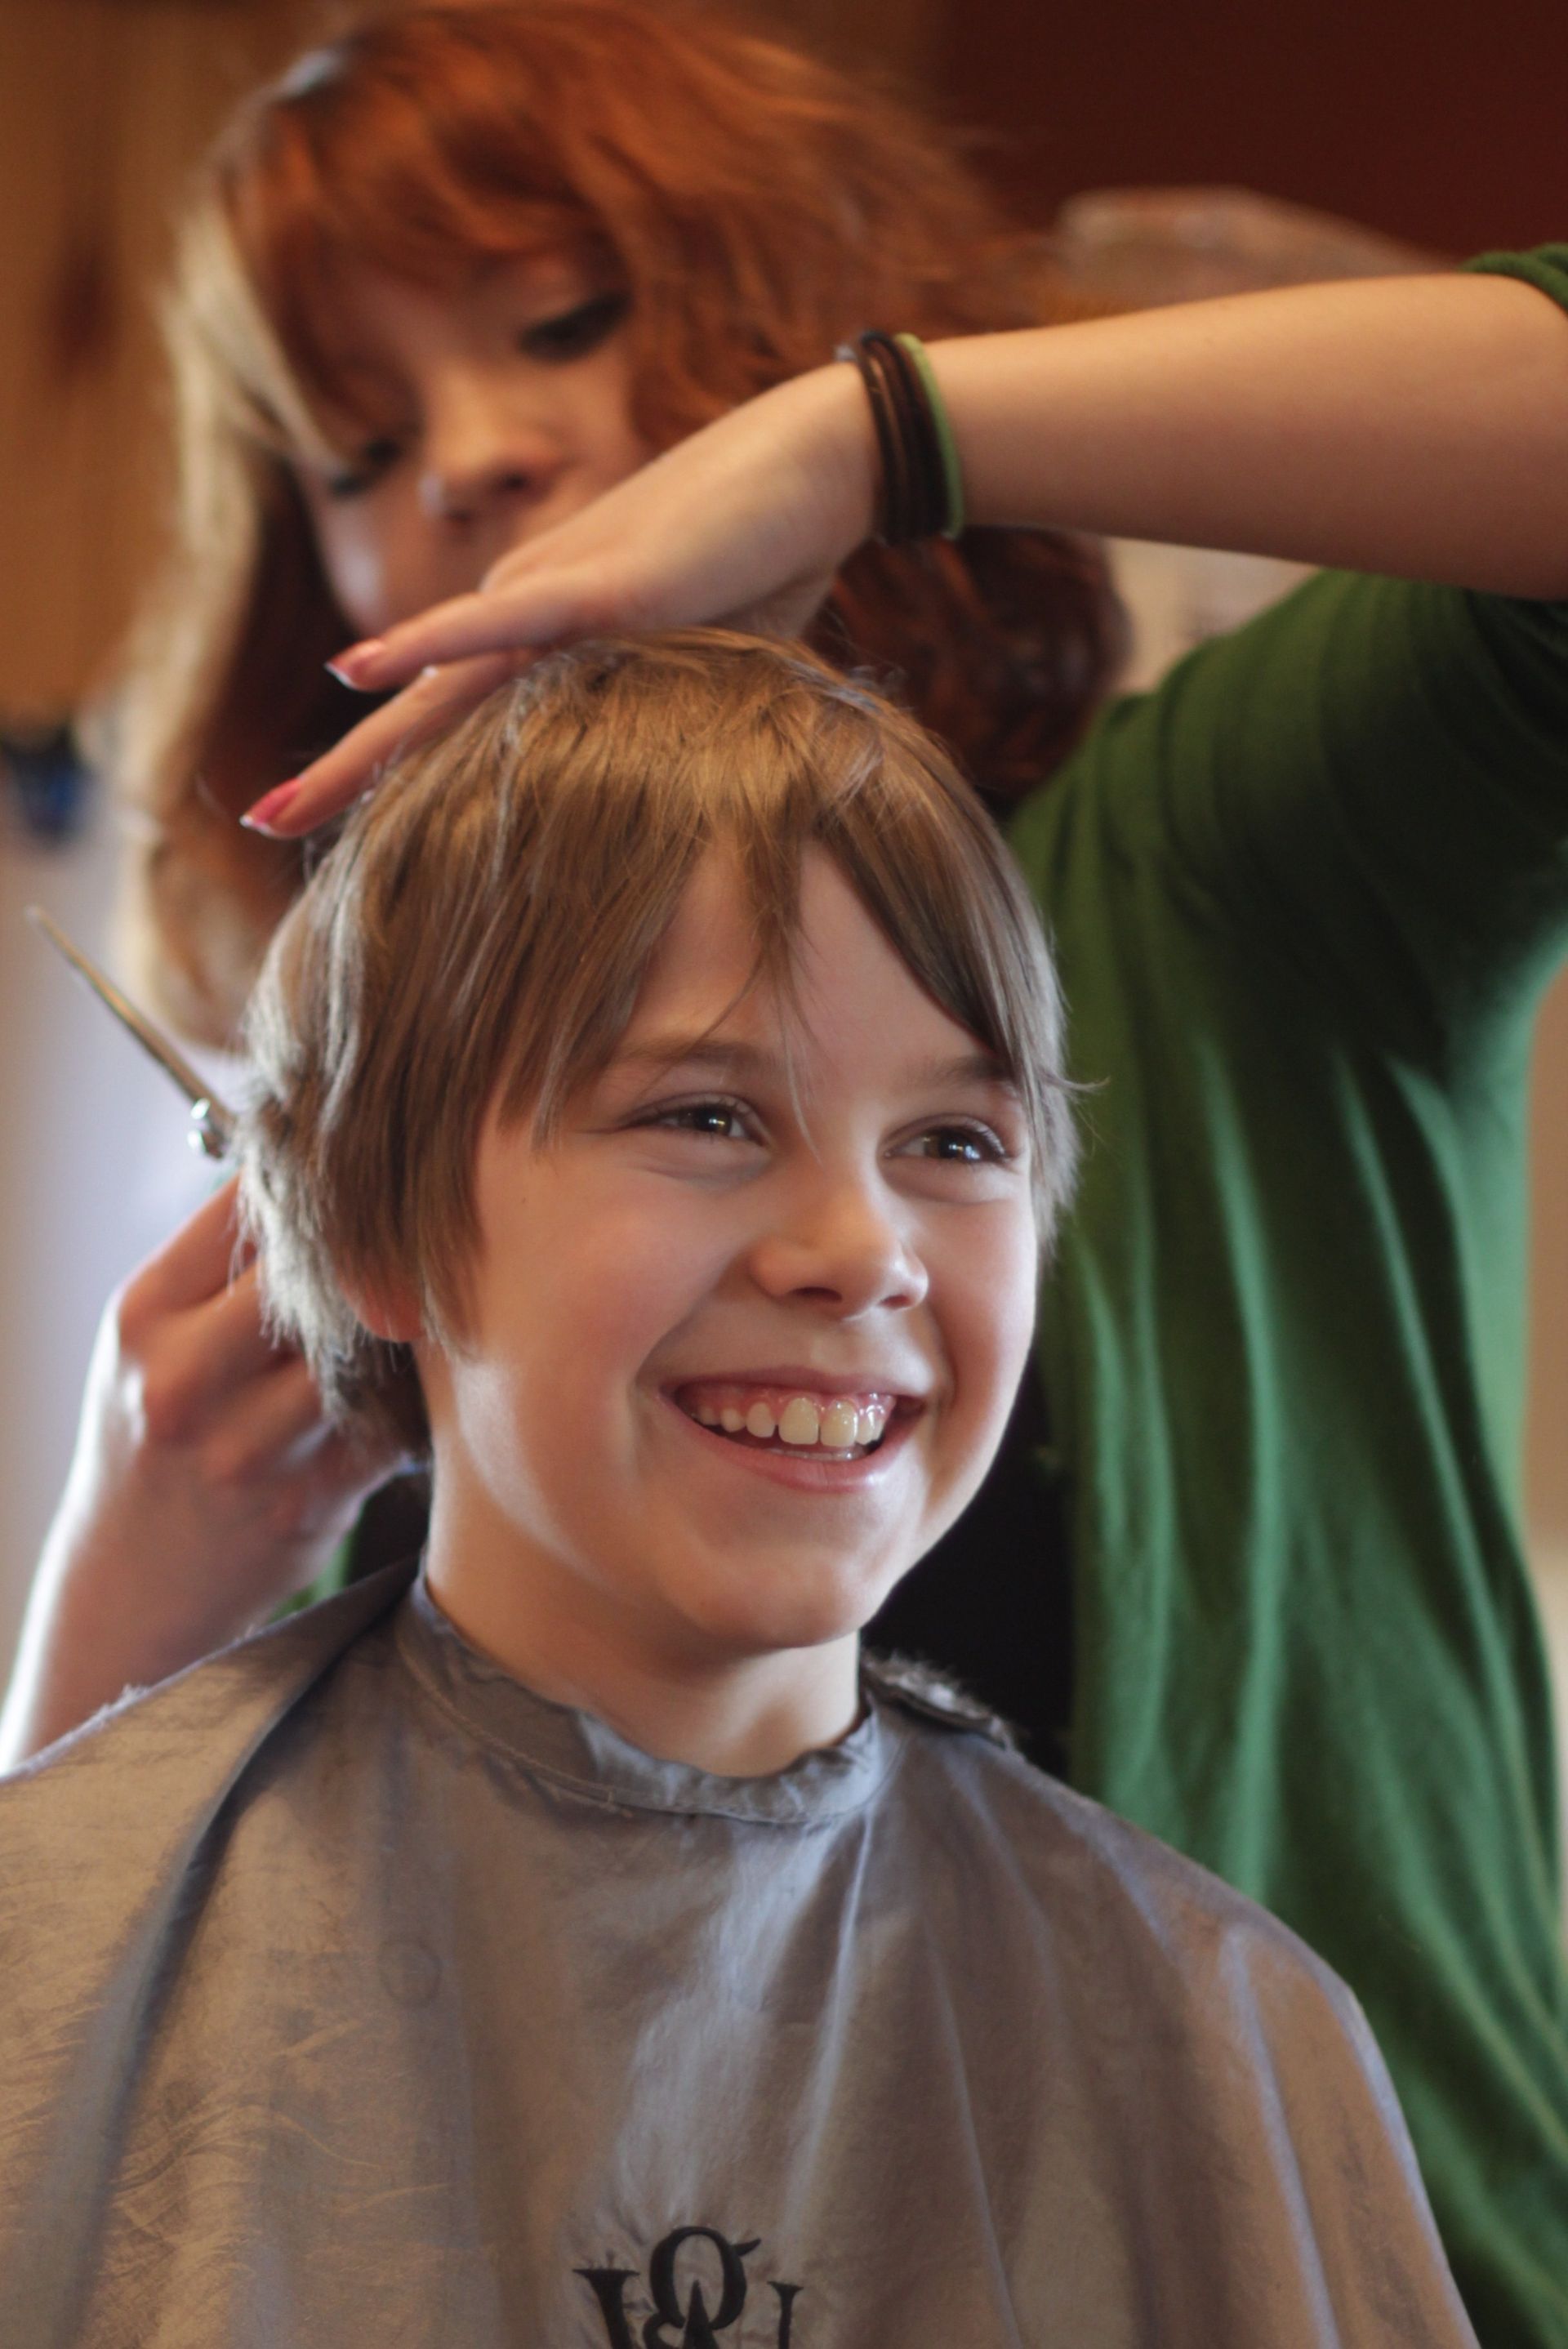 A woman helps cut a young boy’s hair.